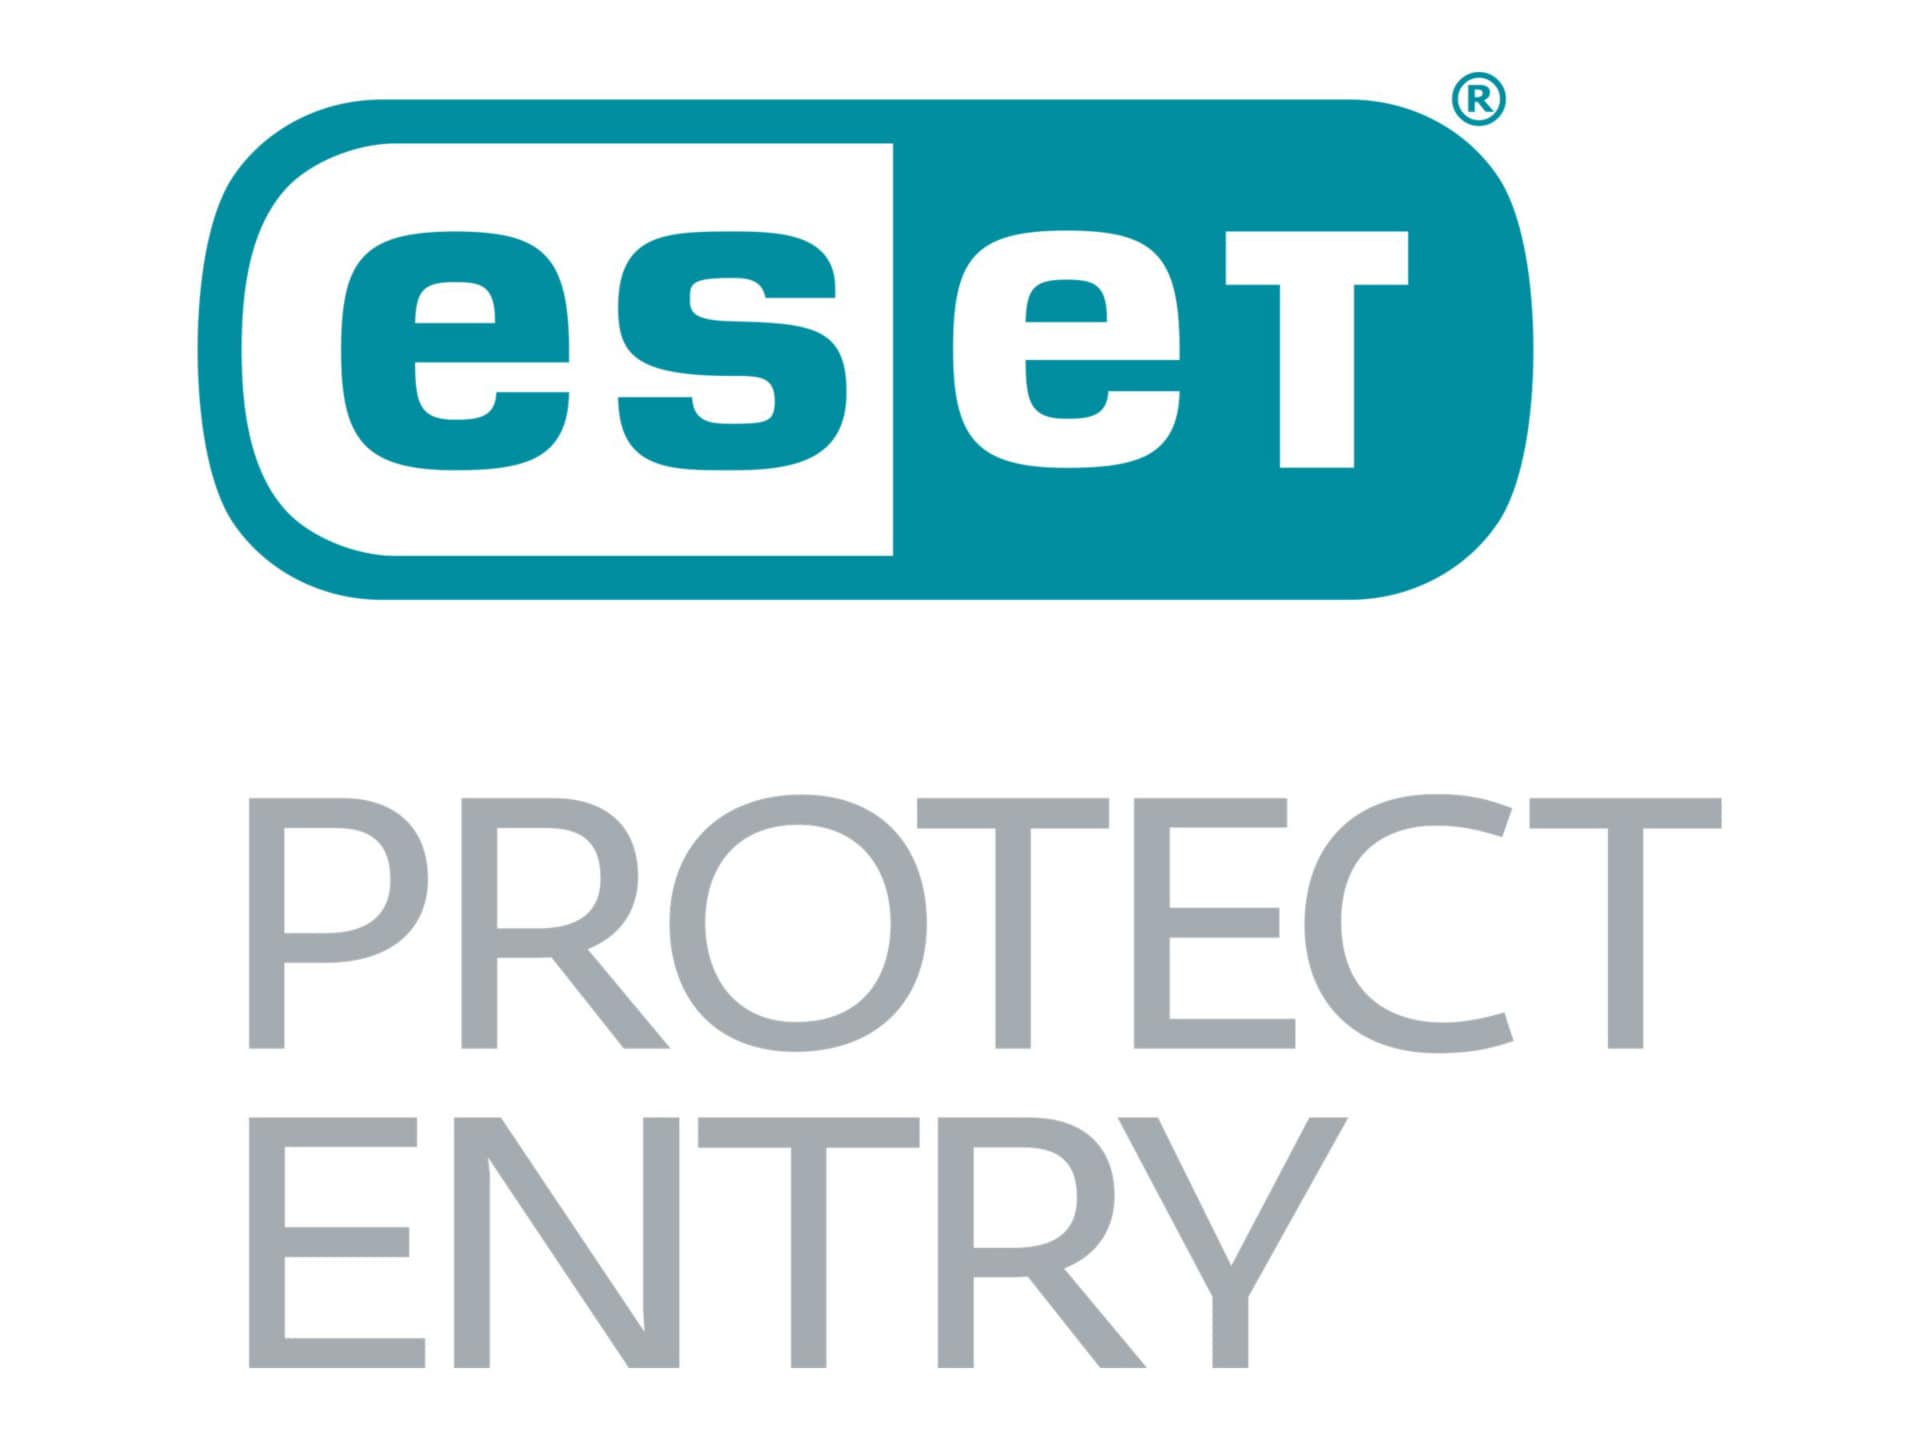 ESET PROTECT Entry - subscription license enlargement (3 years) - 1 device